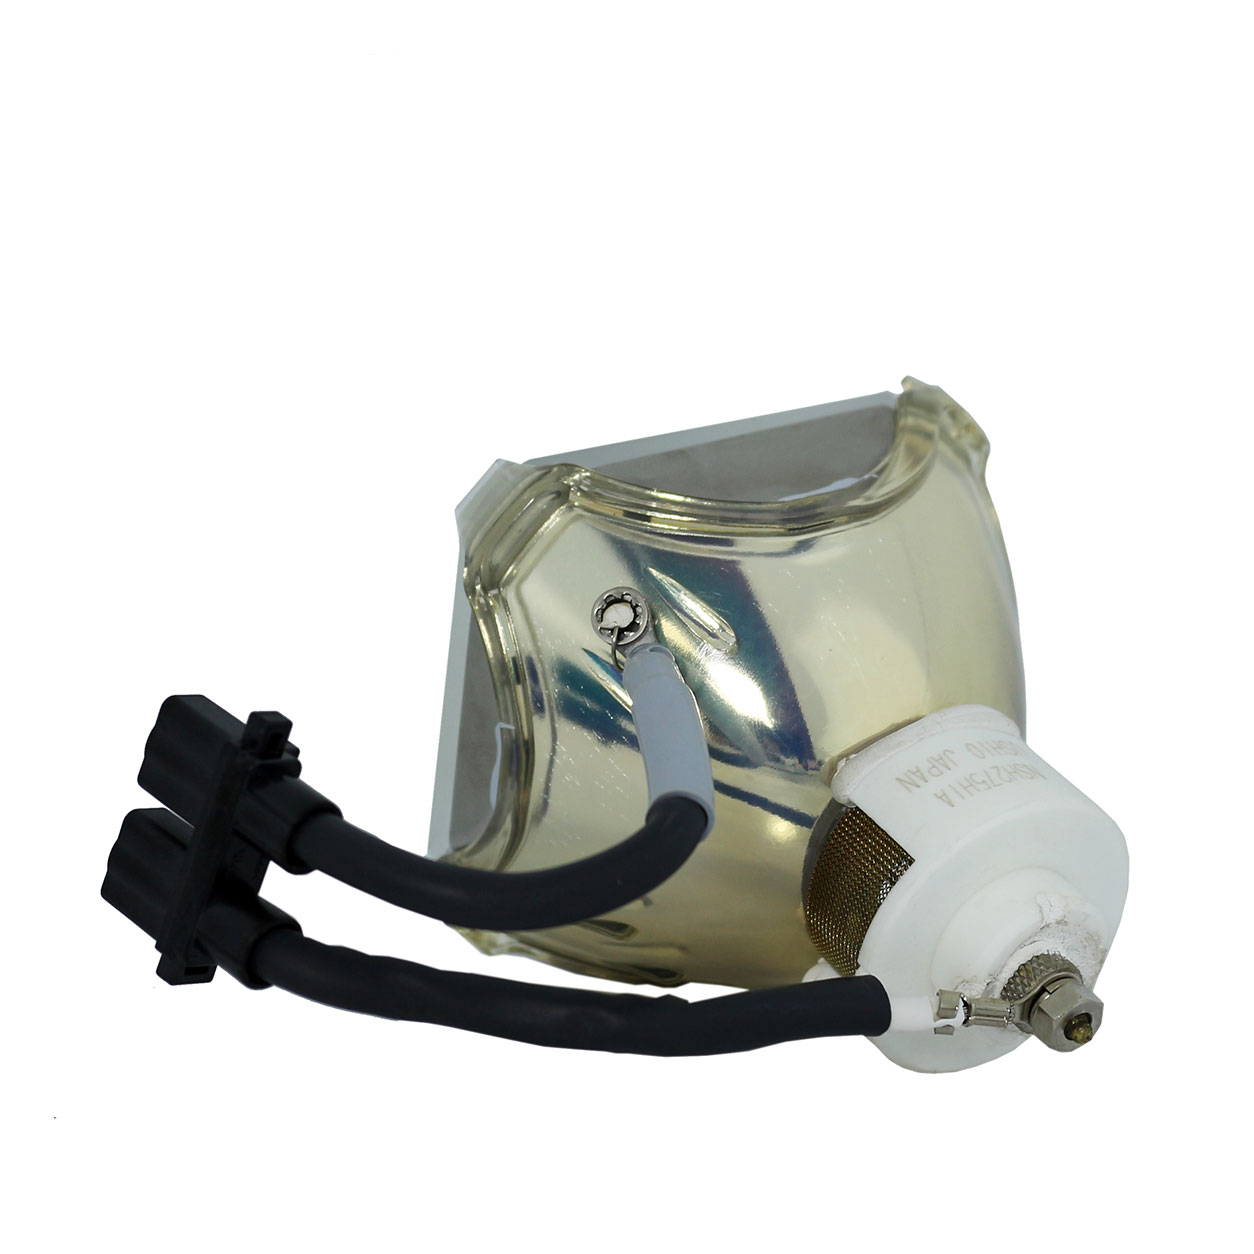 Original Ushio Projector Lamp Replacement with Housing for Liesegang ZU0296-04-4010 